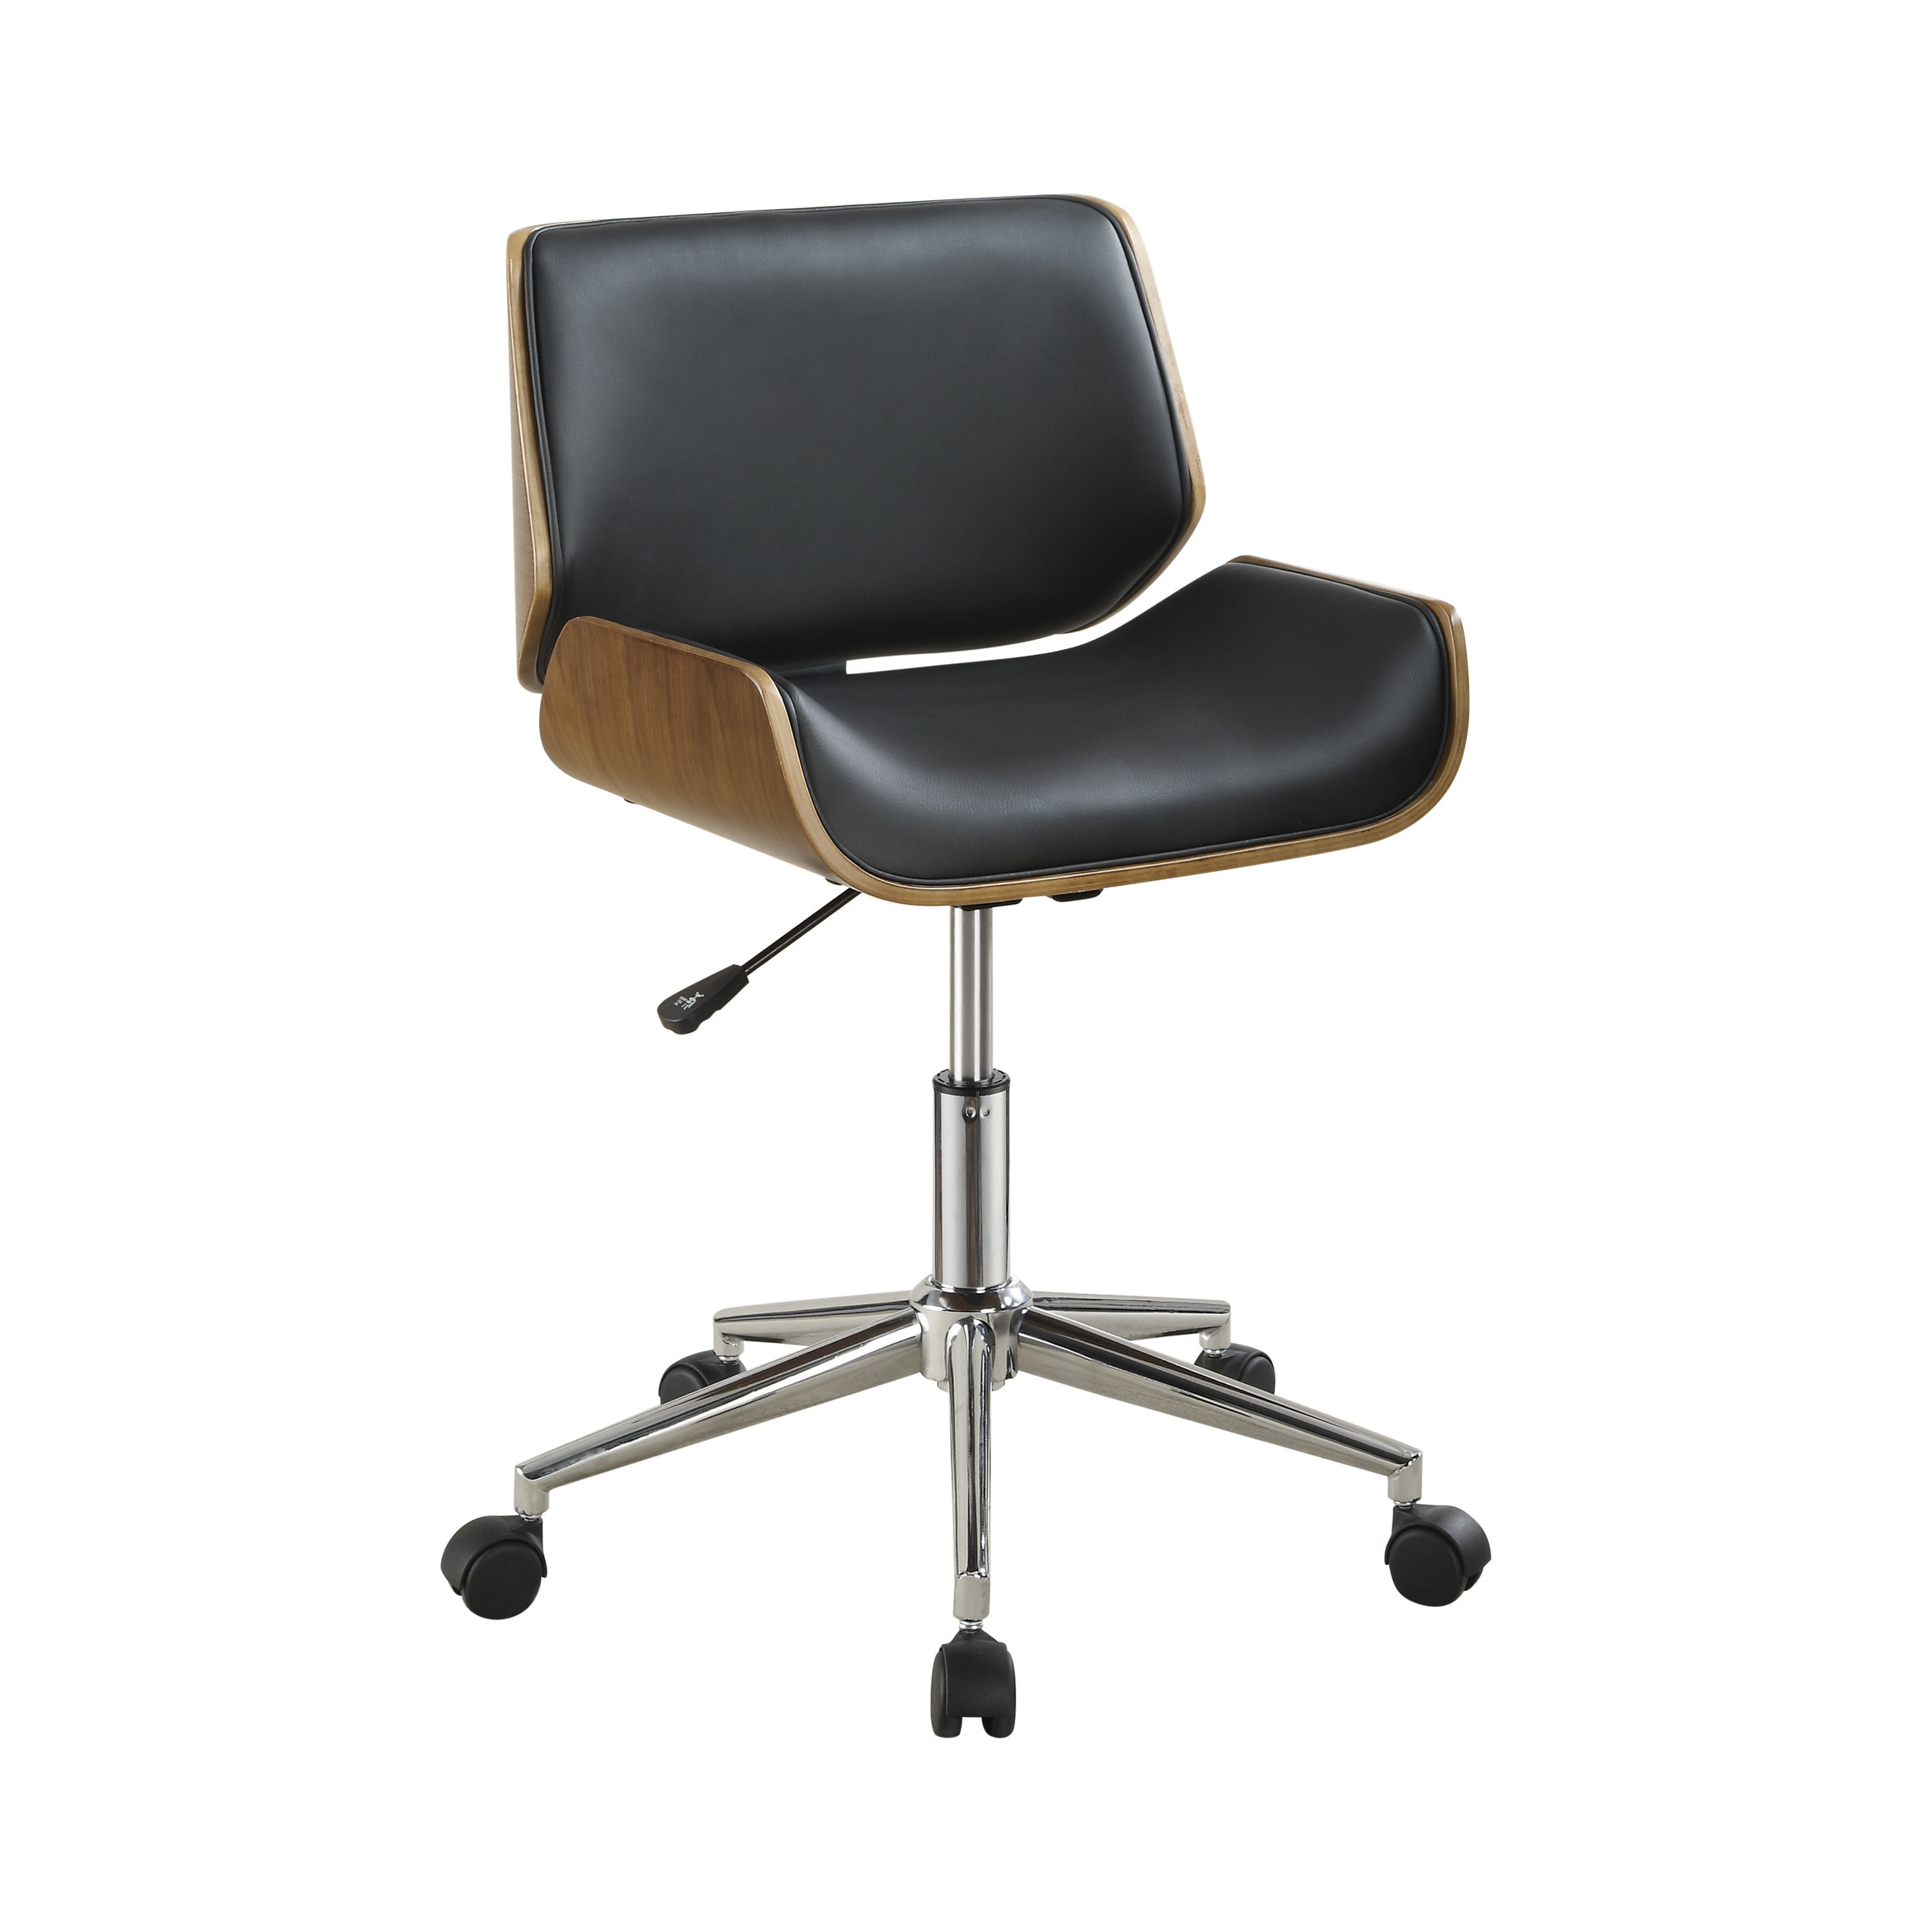 Baxton Studio Ambrosio Faux Leather Metal Office Chair in Black for sale online 